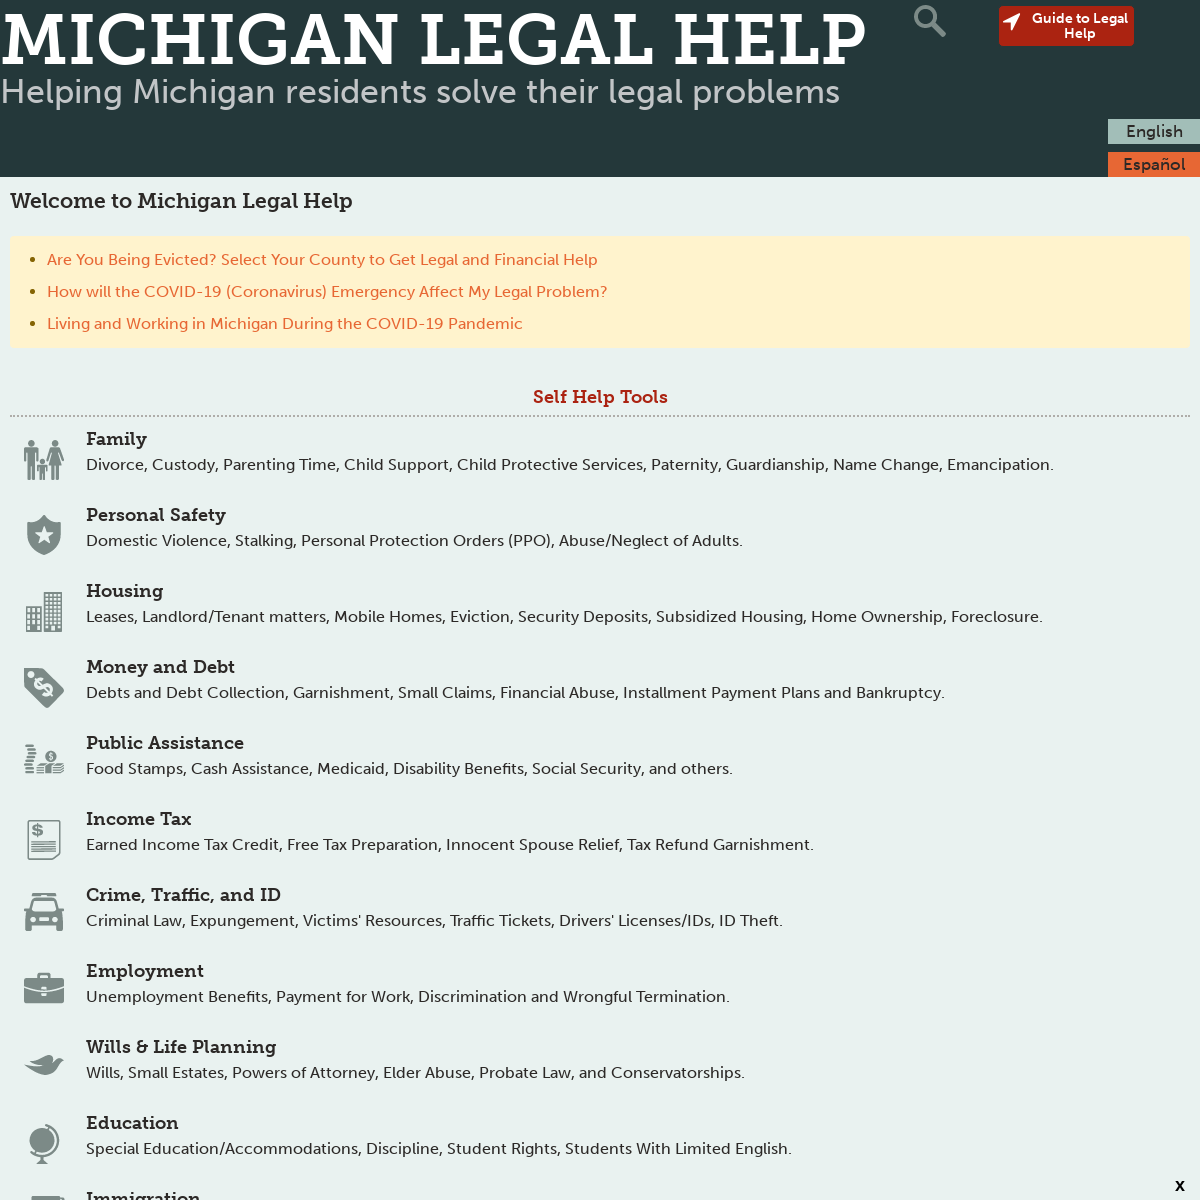 A complete backup of michiganlegalhelp.org